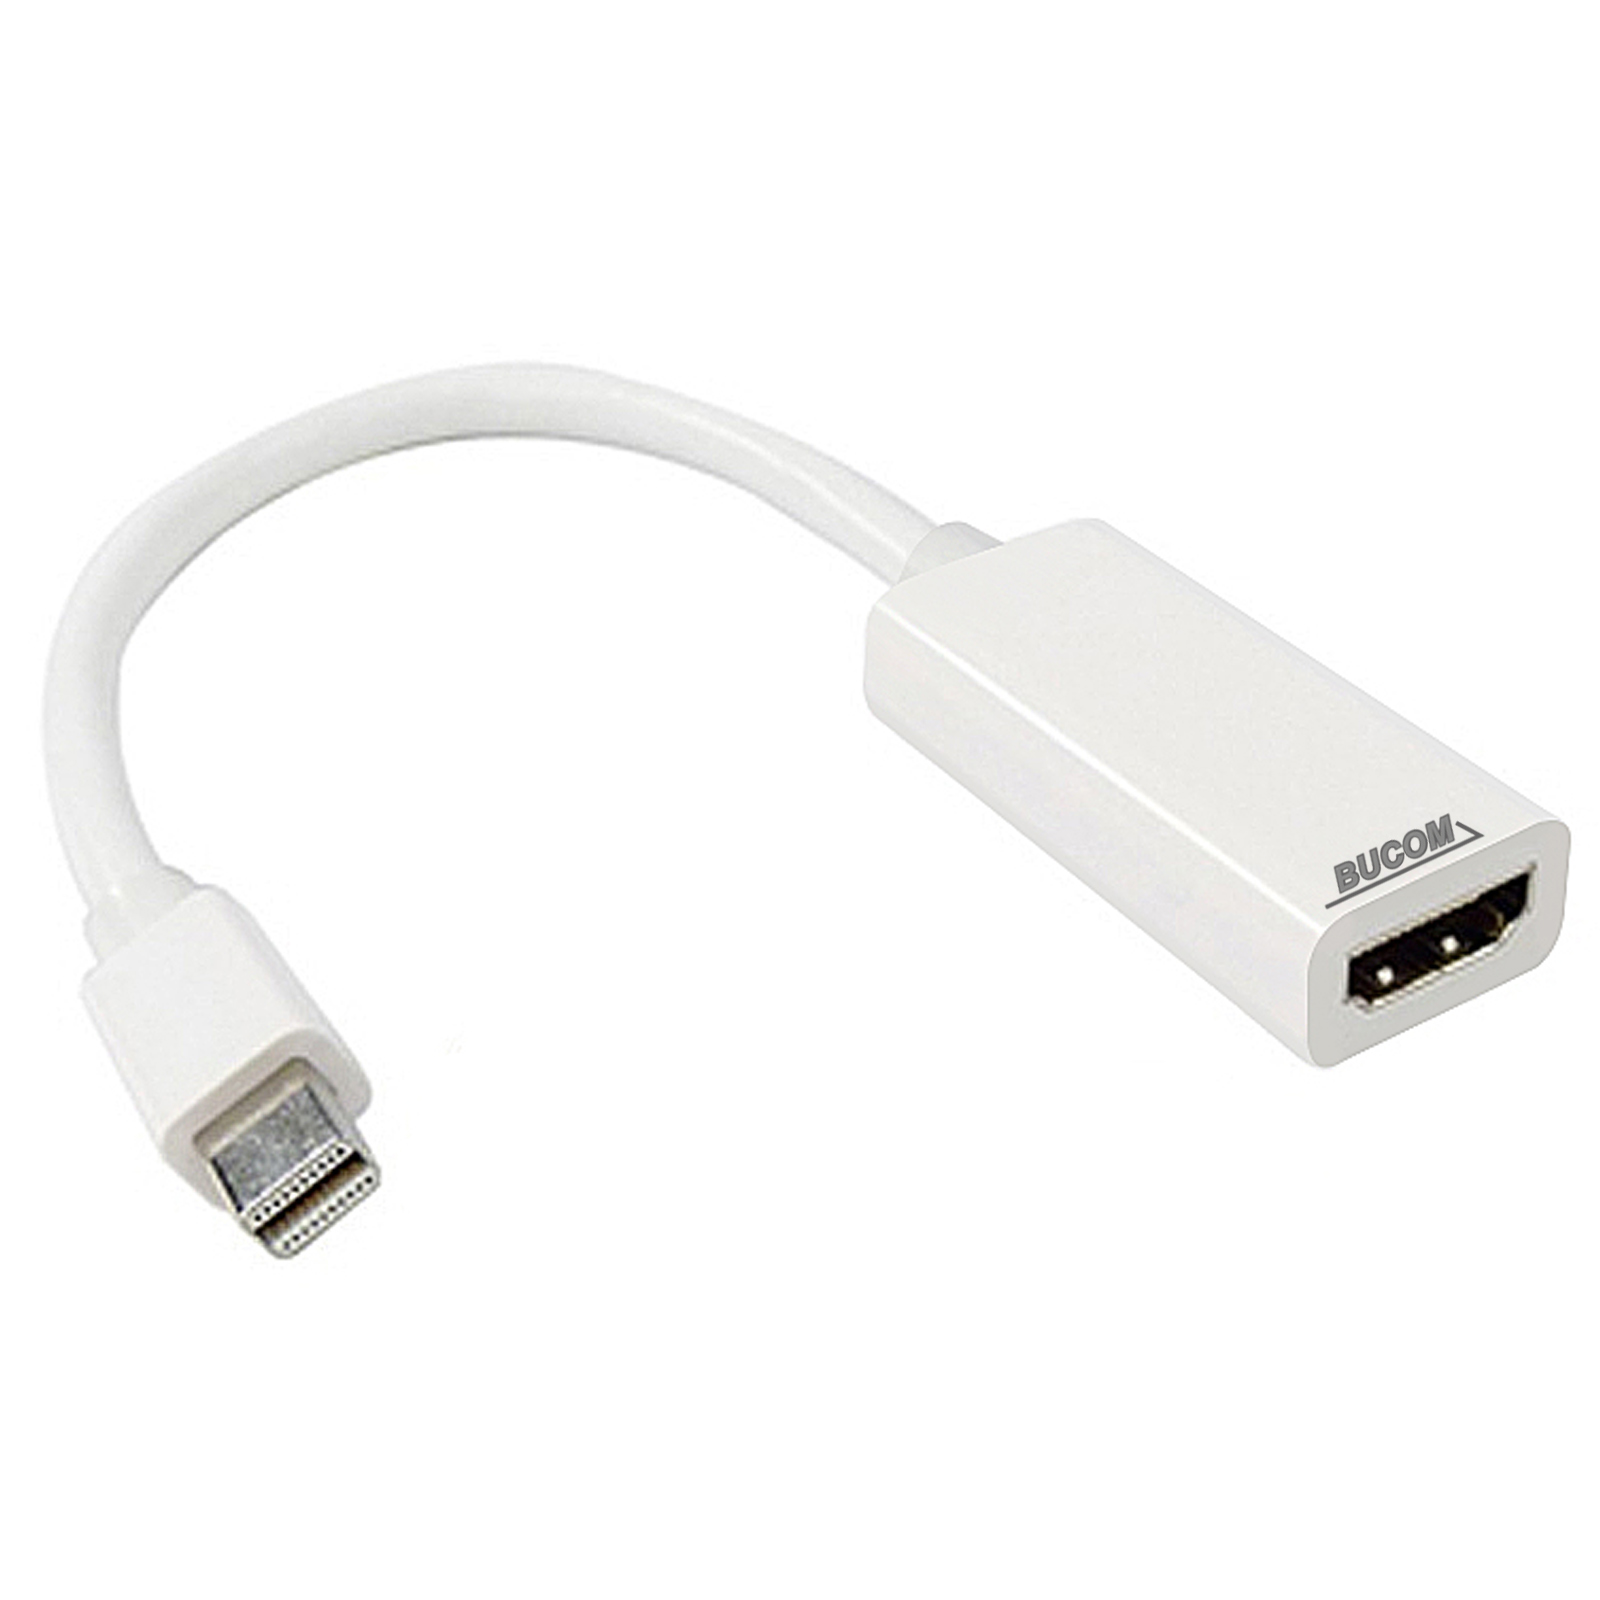 thunderbolt to hdmi cable for mac